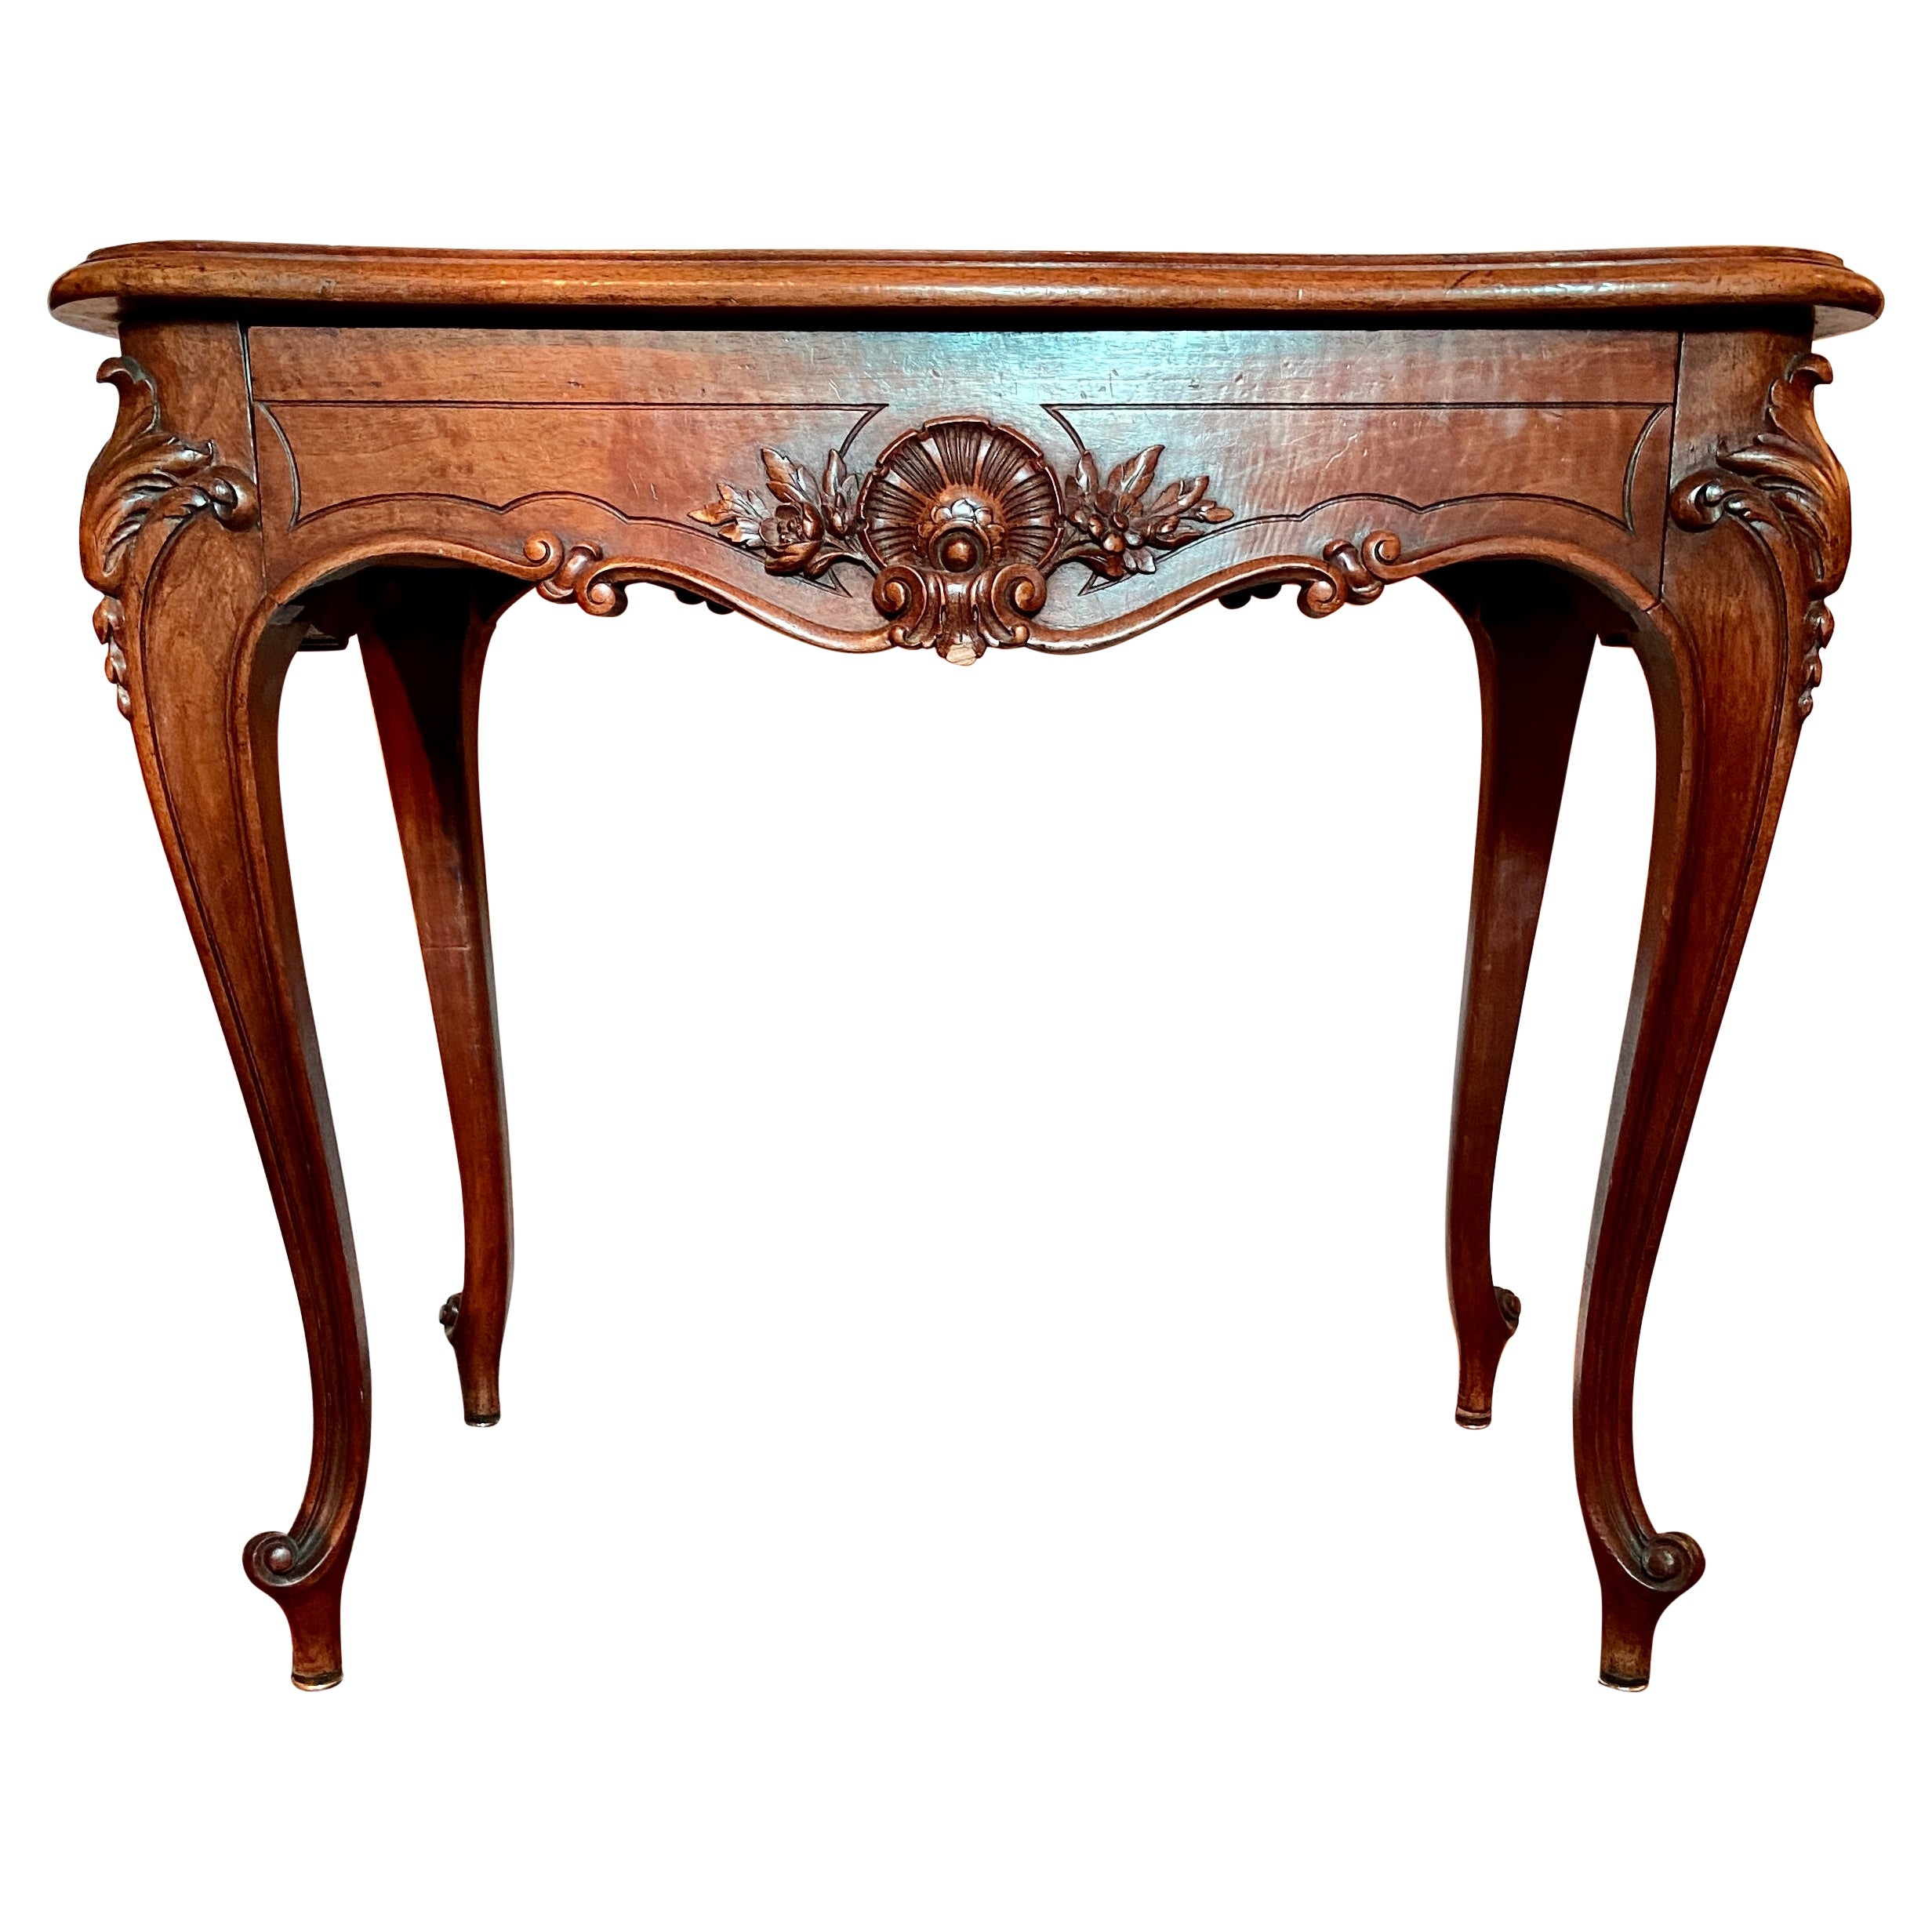 Antique French Carved Walnut Occasional Table, Circa 1860